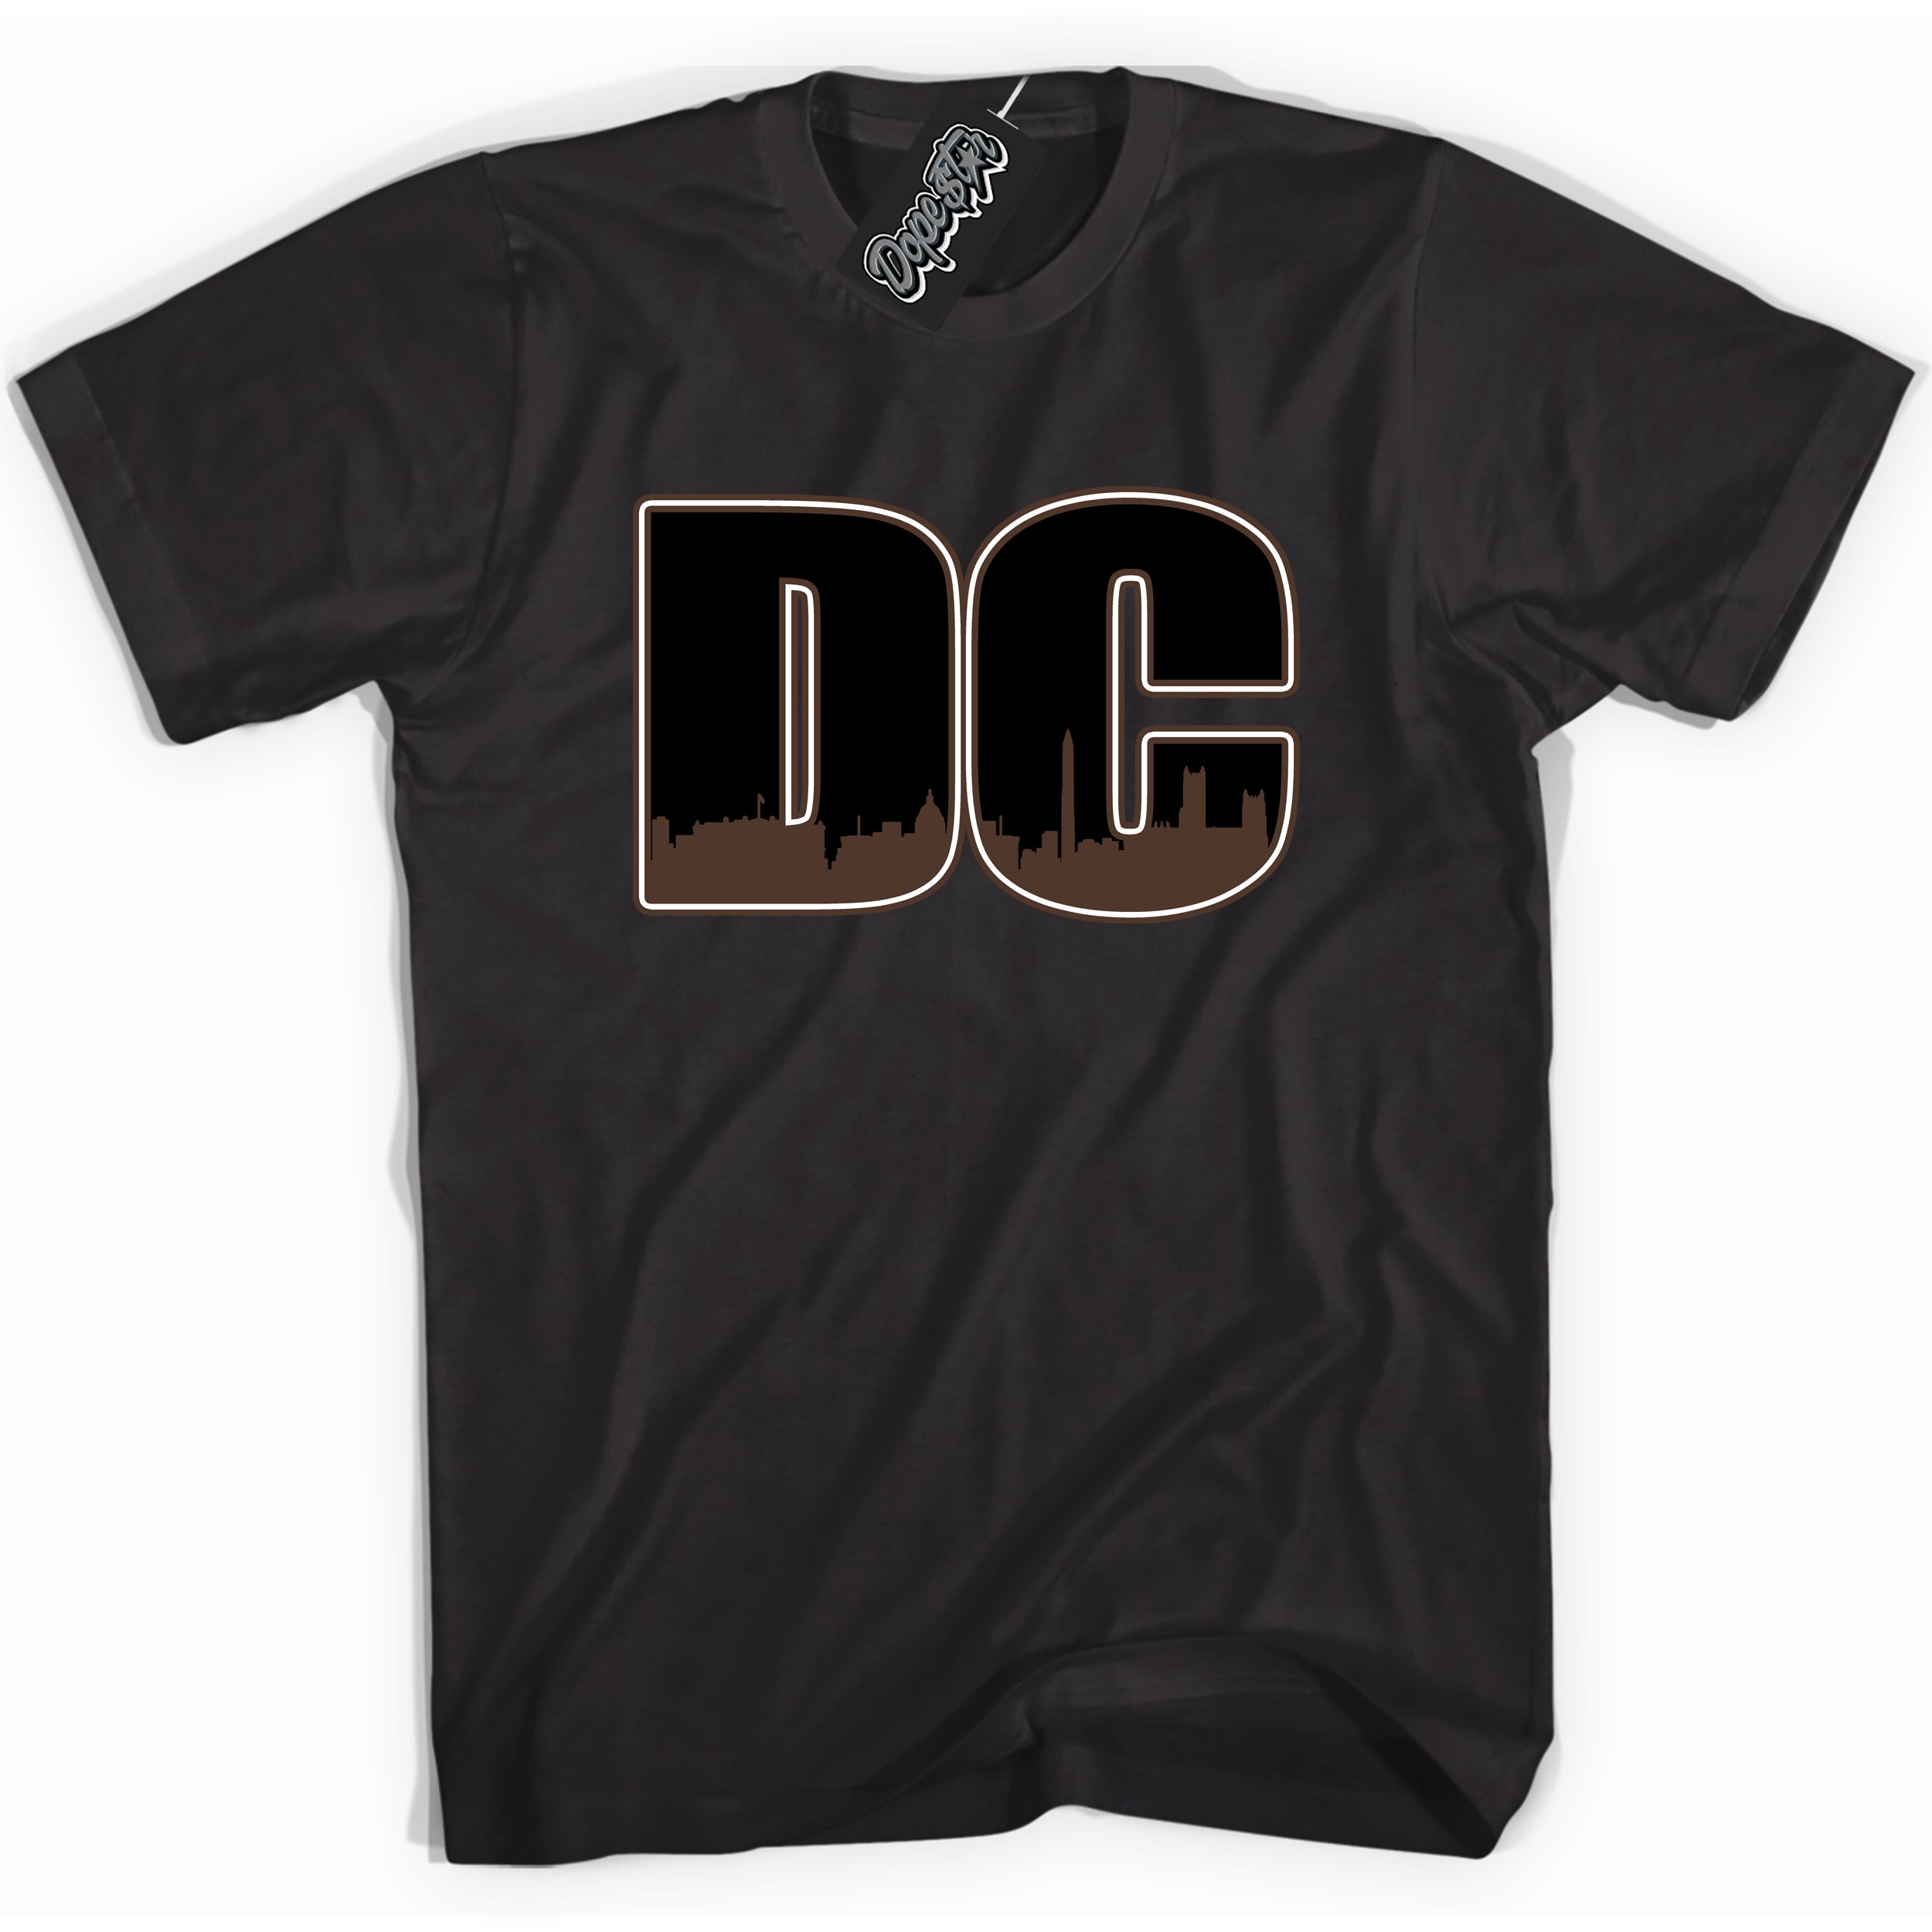 Cool Black graphic tee with “ DC ” design, that perfectly matches Palomino 1s sneakers 